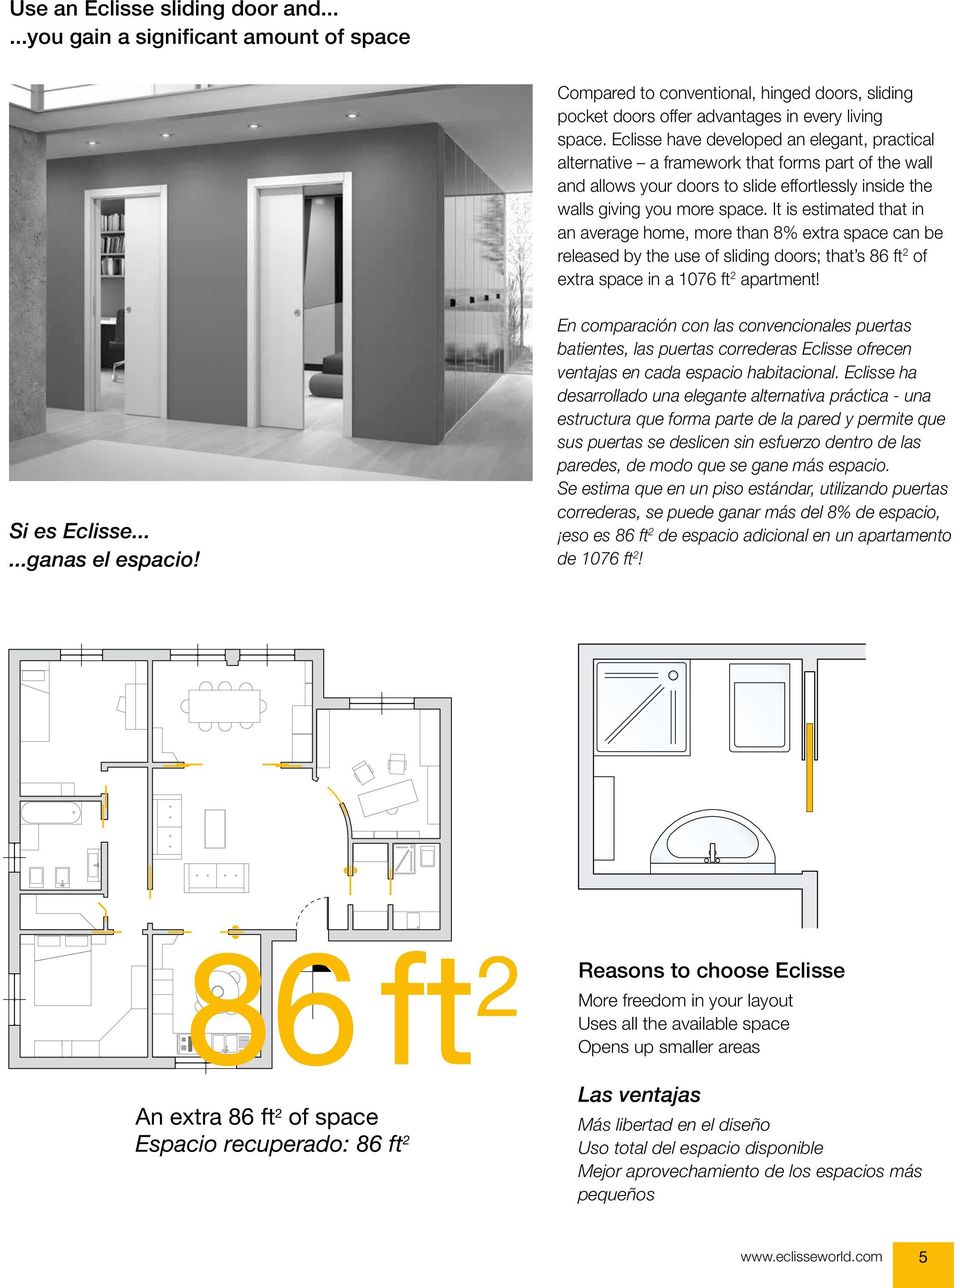 It is estimated that in an average home, more than 8% extra space can be released by the use of sliding doors; that s 86 ft 2 of extra space in a 1076 ft 2 apartment! Si es Eclisse......ganas el espacio!